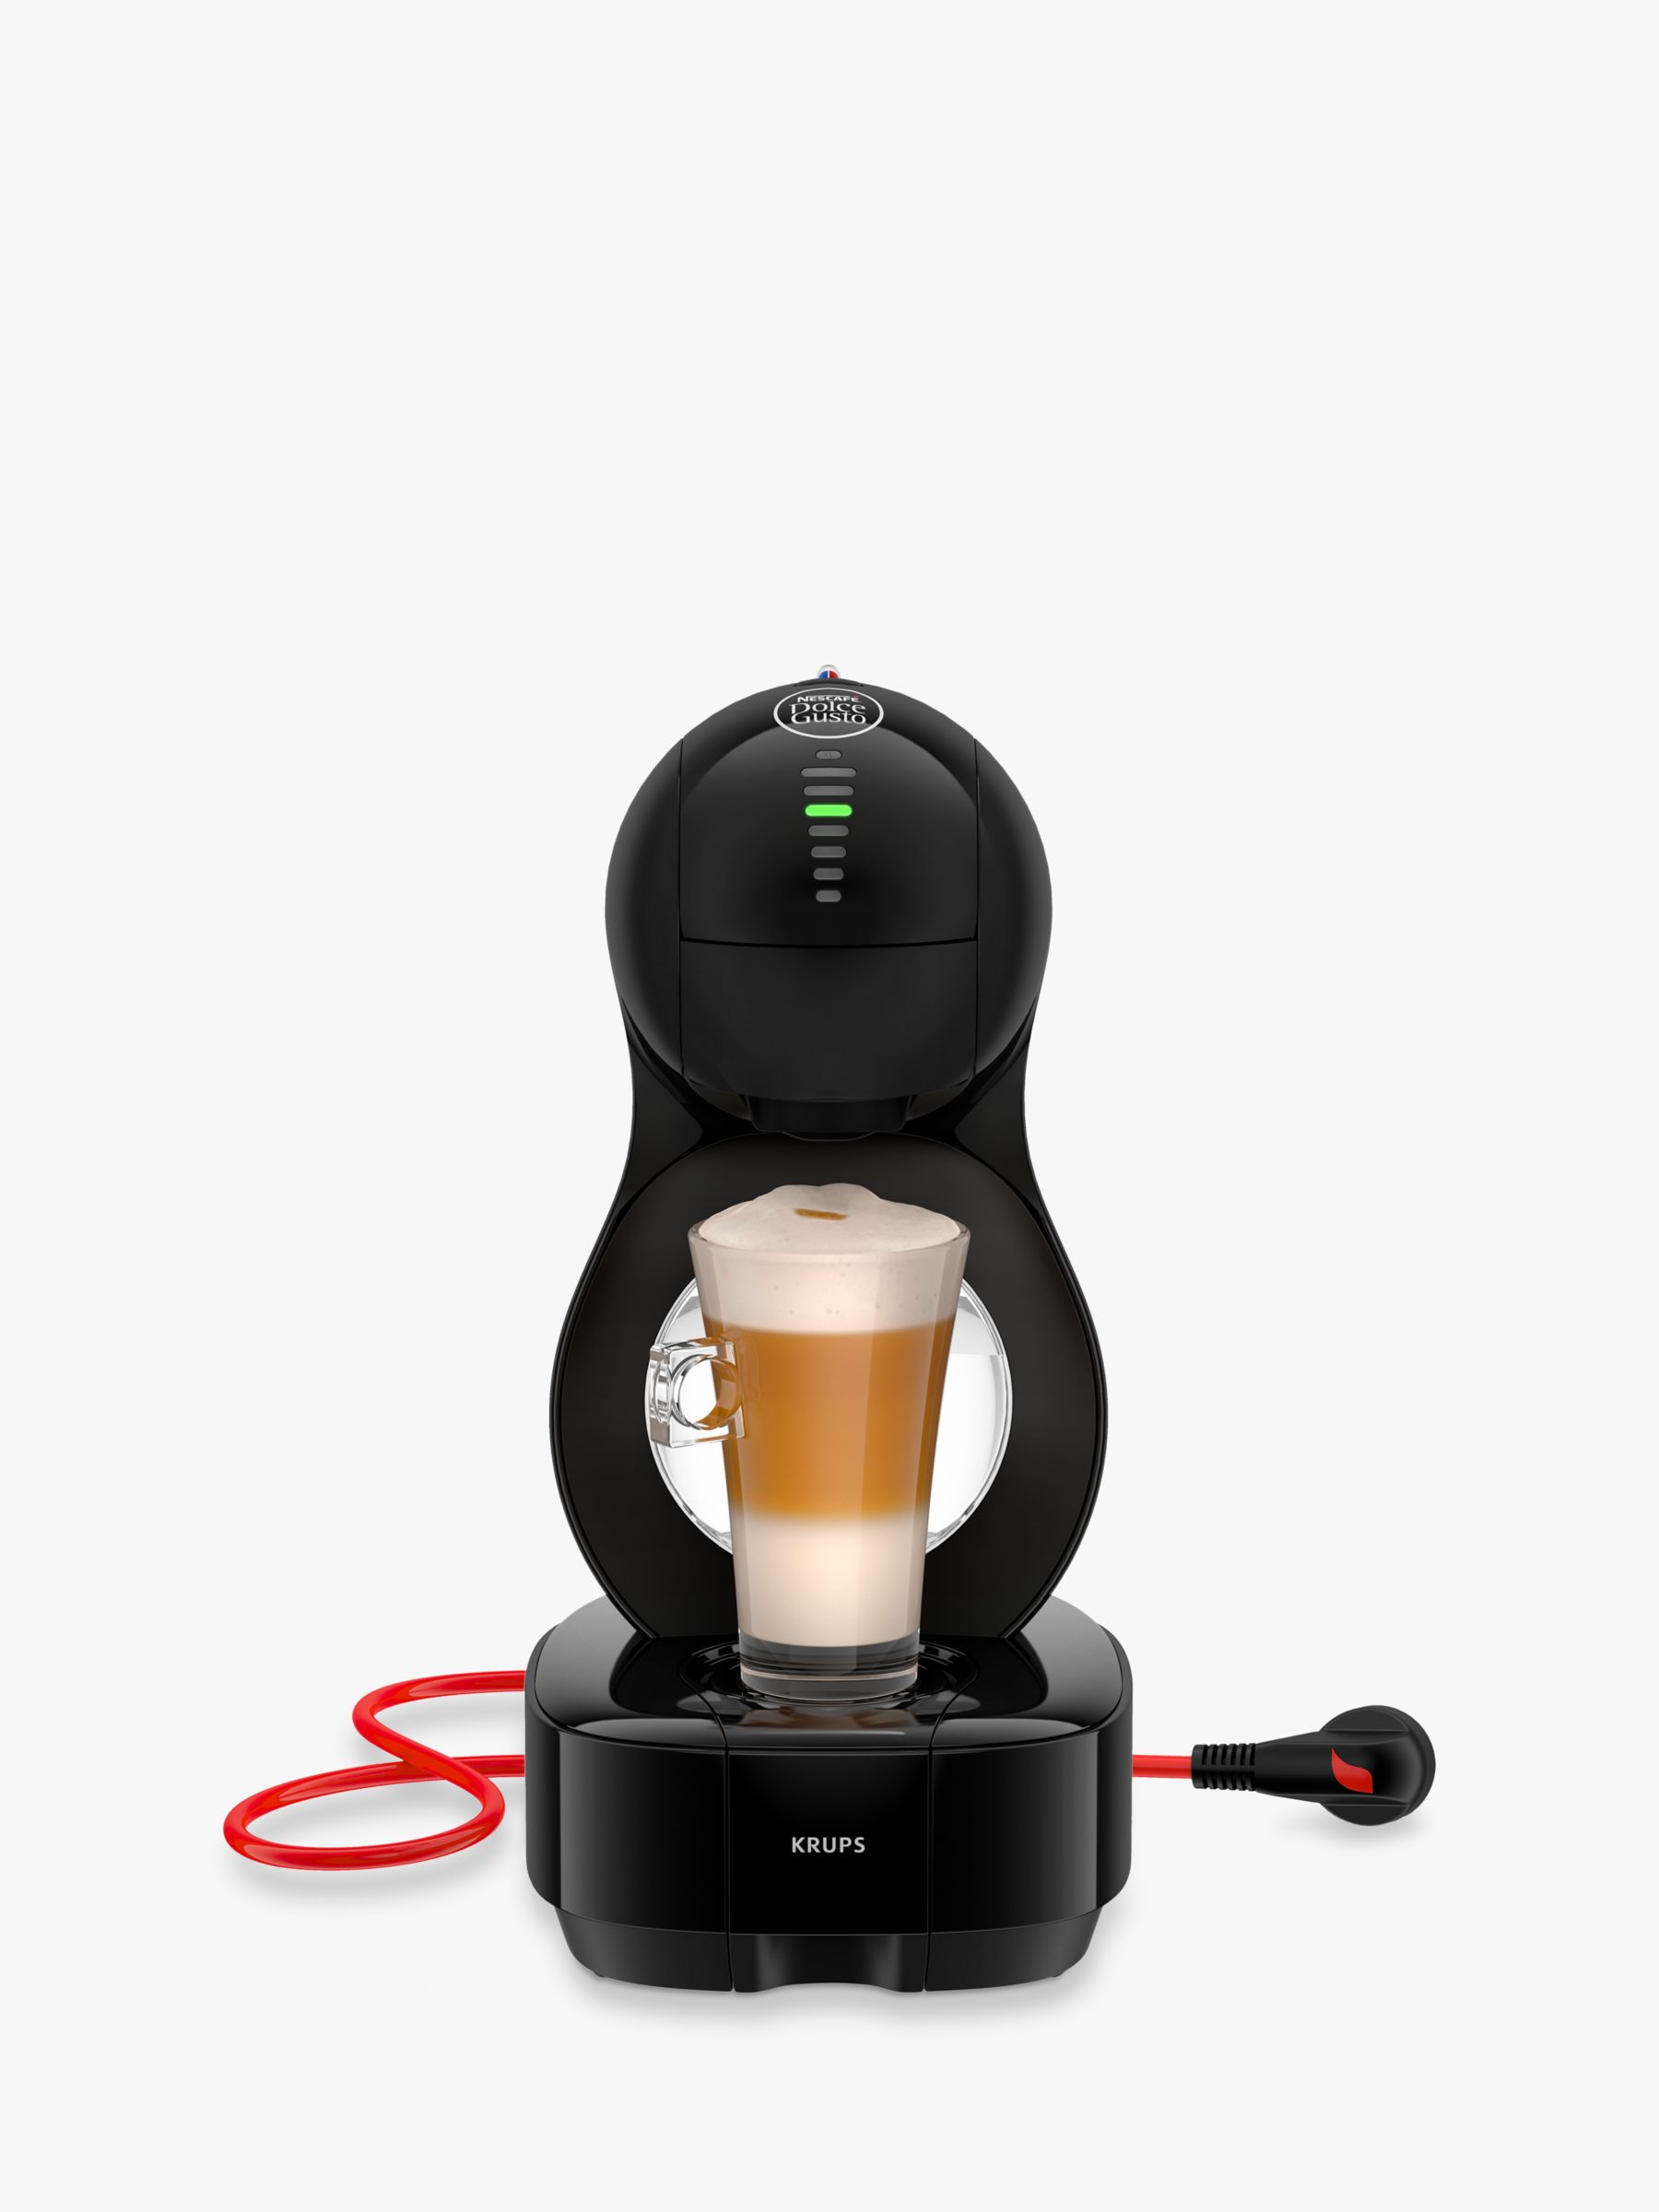 How to prepare a Cappuccino with your NESCAFE DOLCE GUSTO Lumio